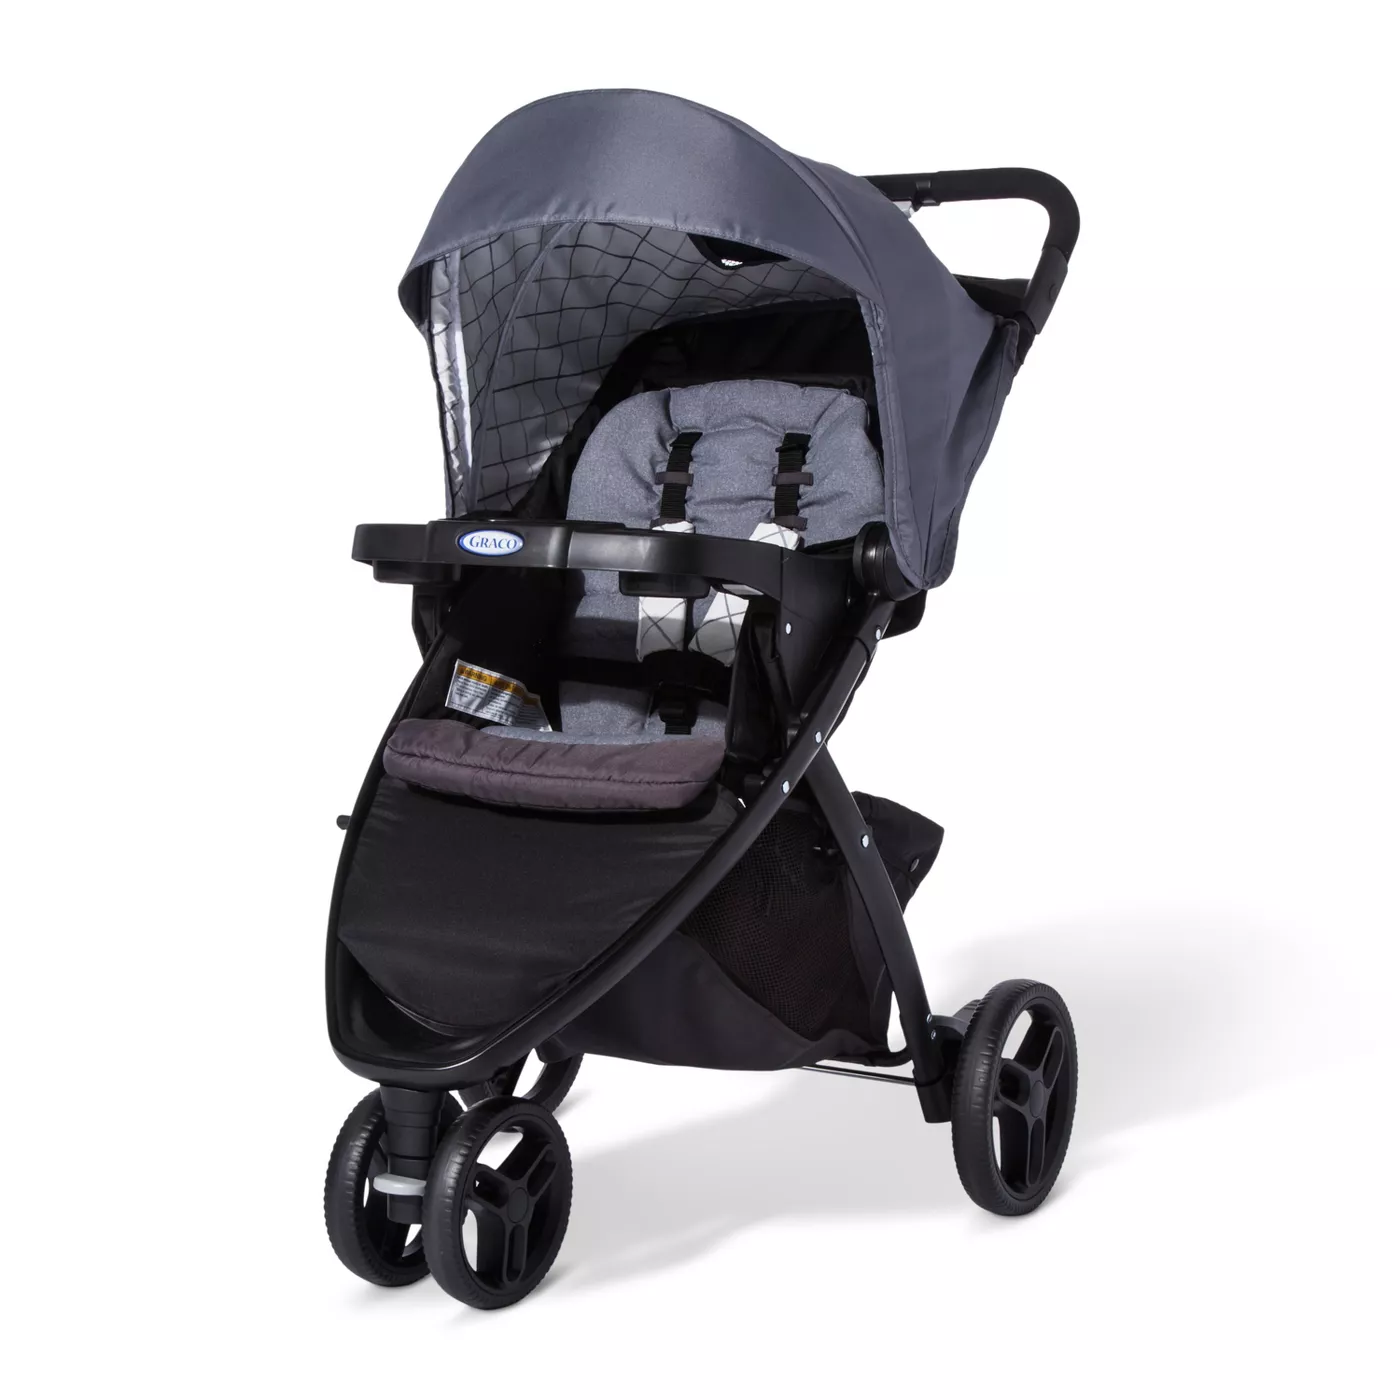 Graco Pace Click Connect Stroller - Whitmore - image 1 of 5